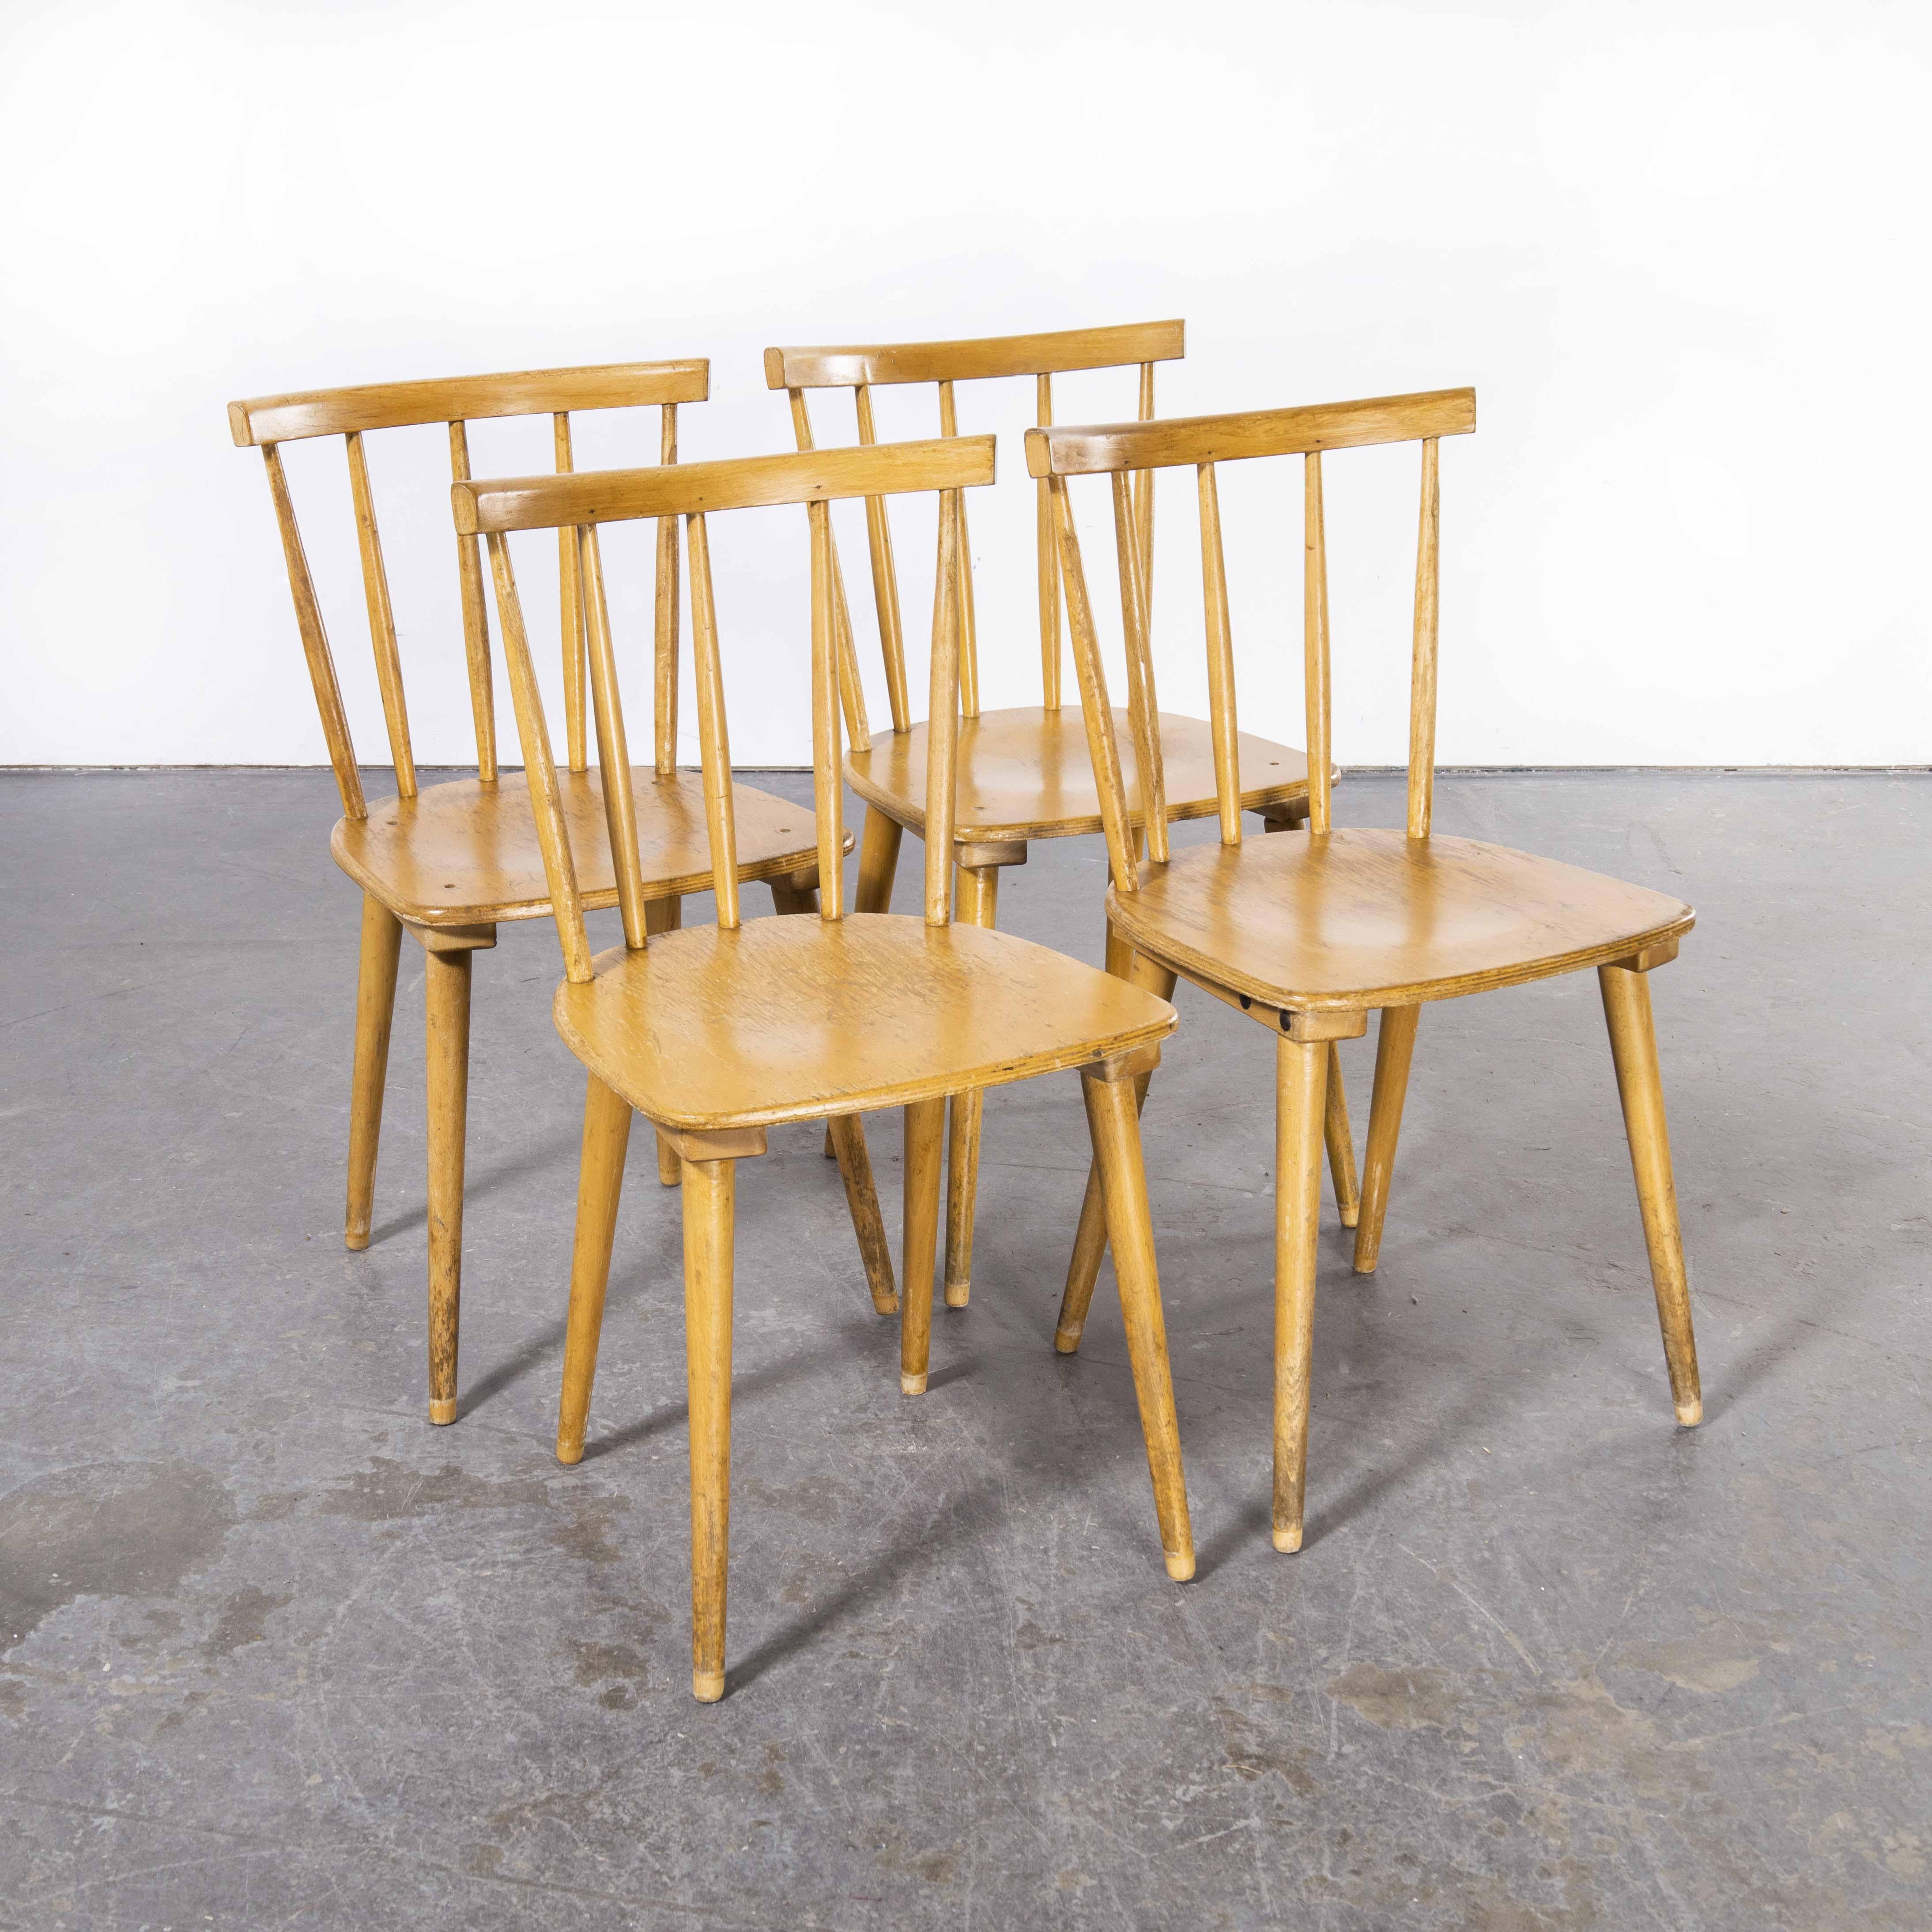 1950’s French slim back stick back dining chairs – set of four
1950’s French slim back stick back dining chairs – set of four Classic French stick back dining chairs made in beech wood with a lovely warm colour and original character. Beautifully